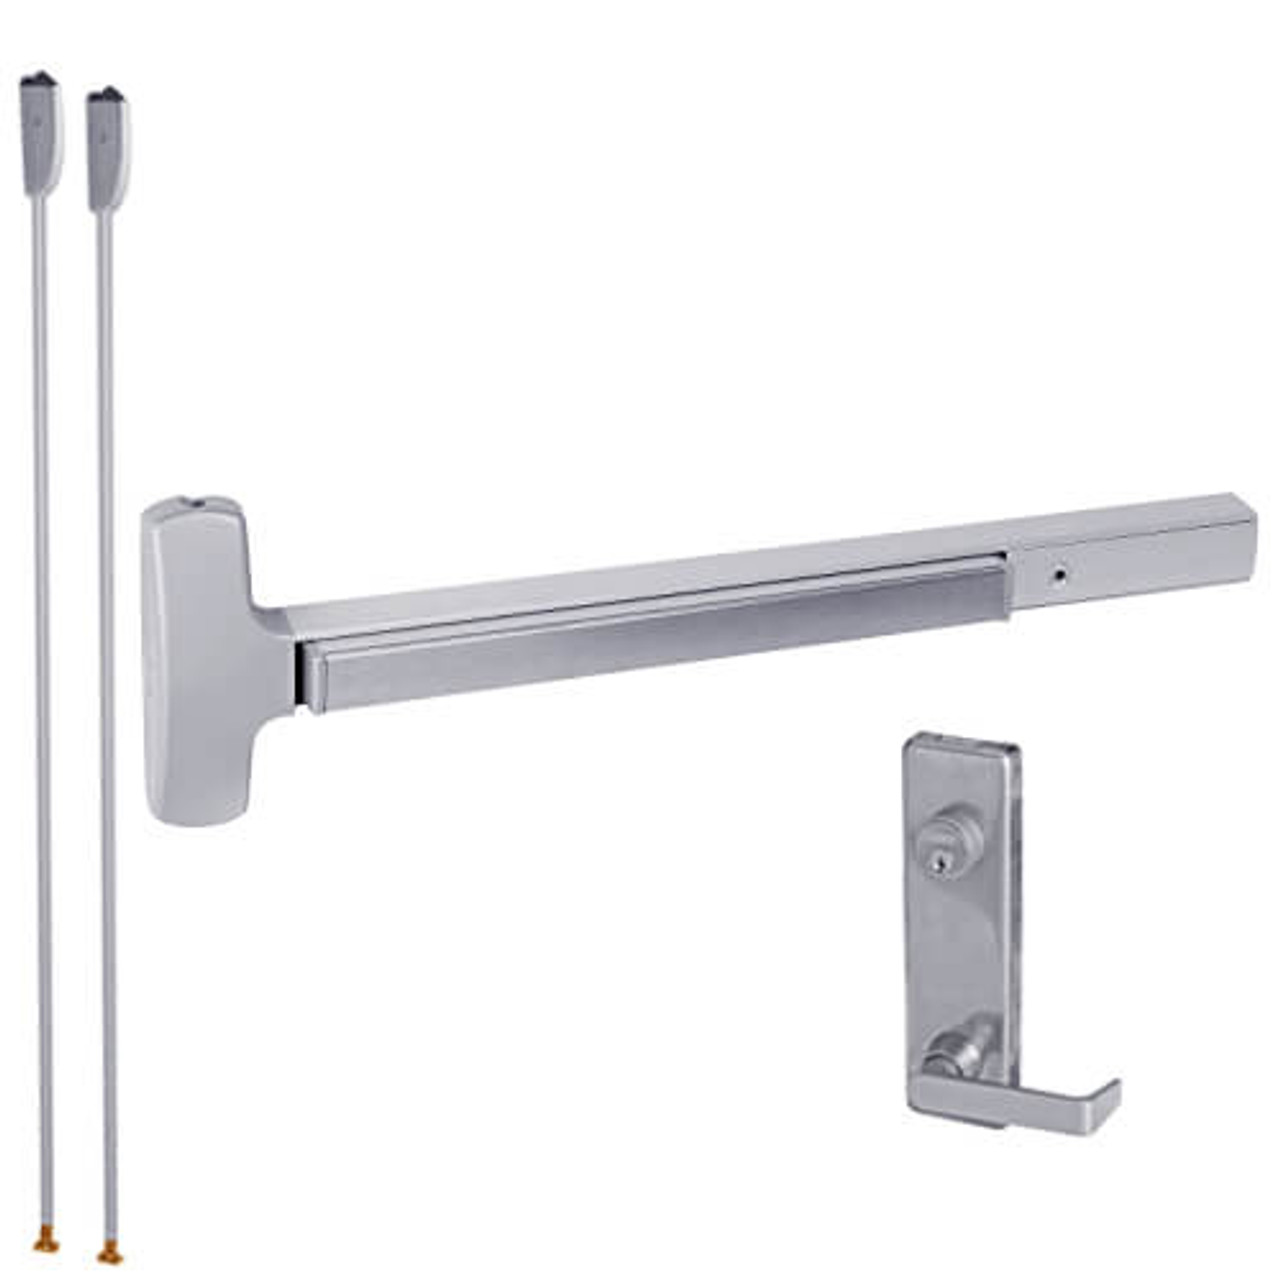 25-V-L-DANE-US32-2-LHR Falcon Exit Device in Polished Stainless Steel